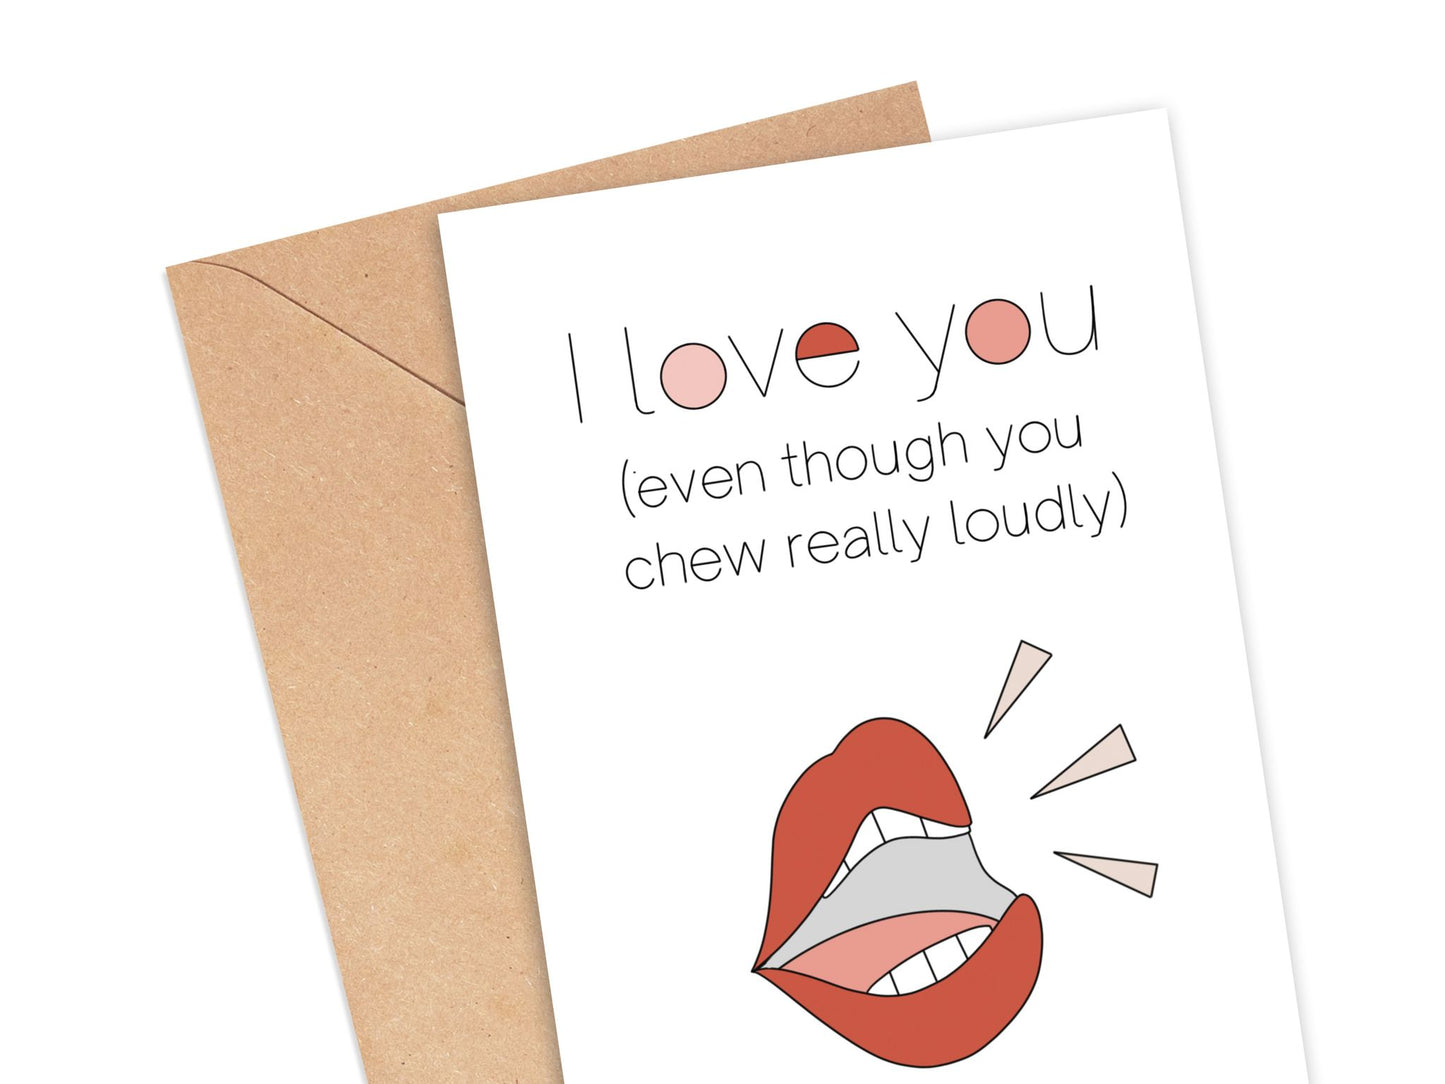 I Love You Even Though You Chew Really Loudly Card Simply Happy Cards